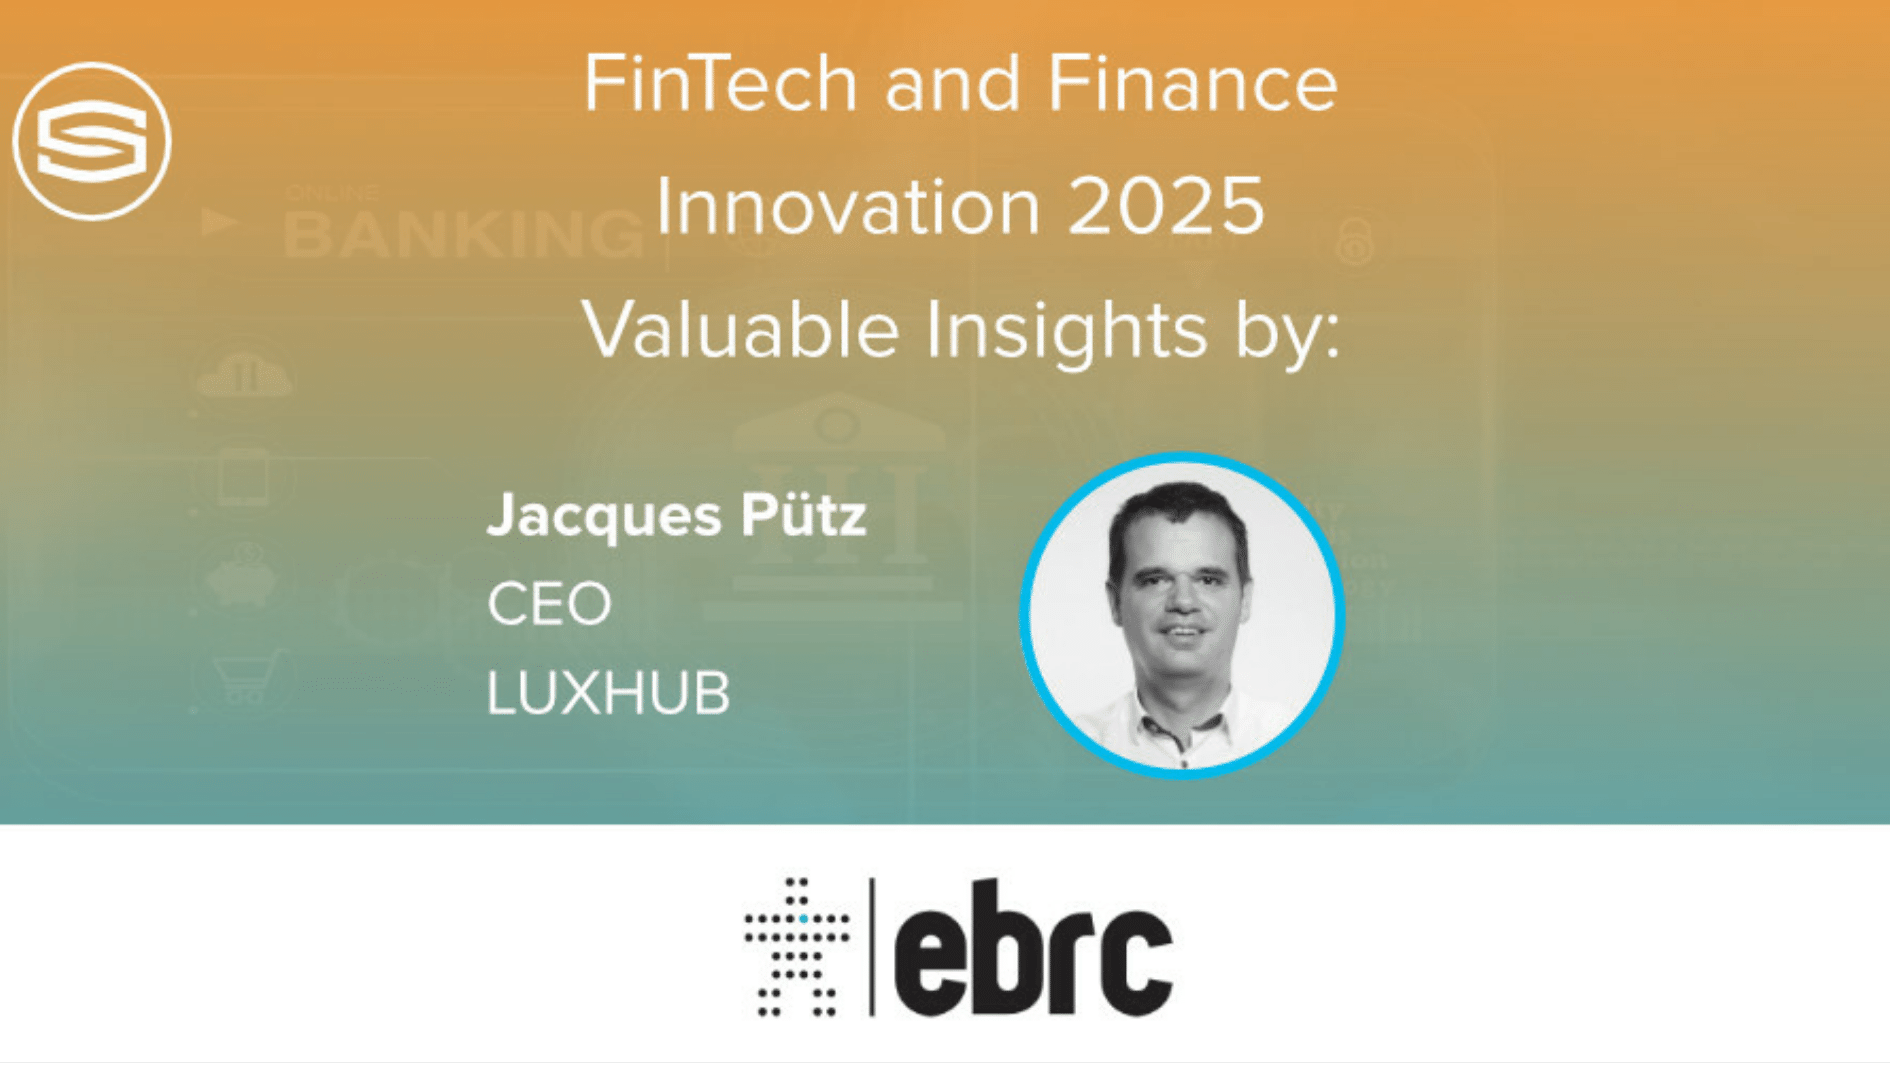 FinTech and Finance Innovation 2025 Insights by Jacques Pütz, CEO LUXHUB